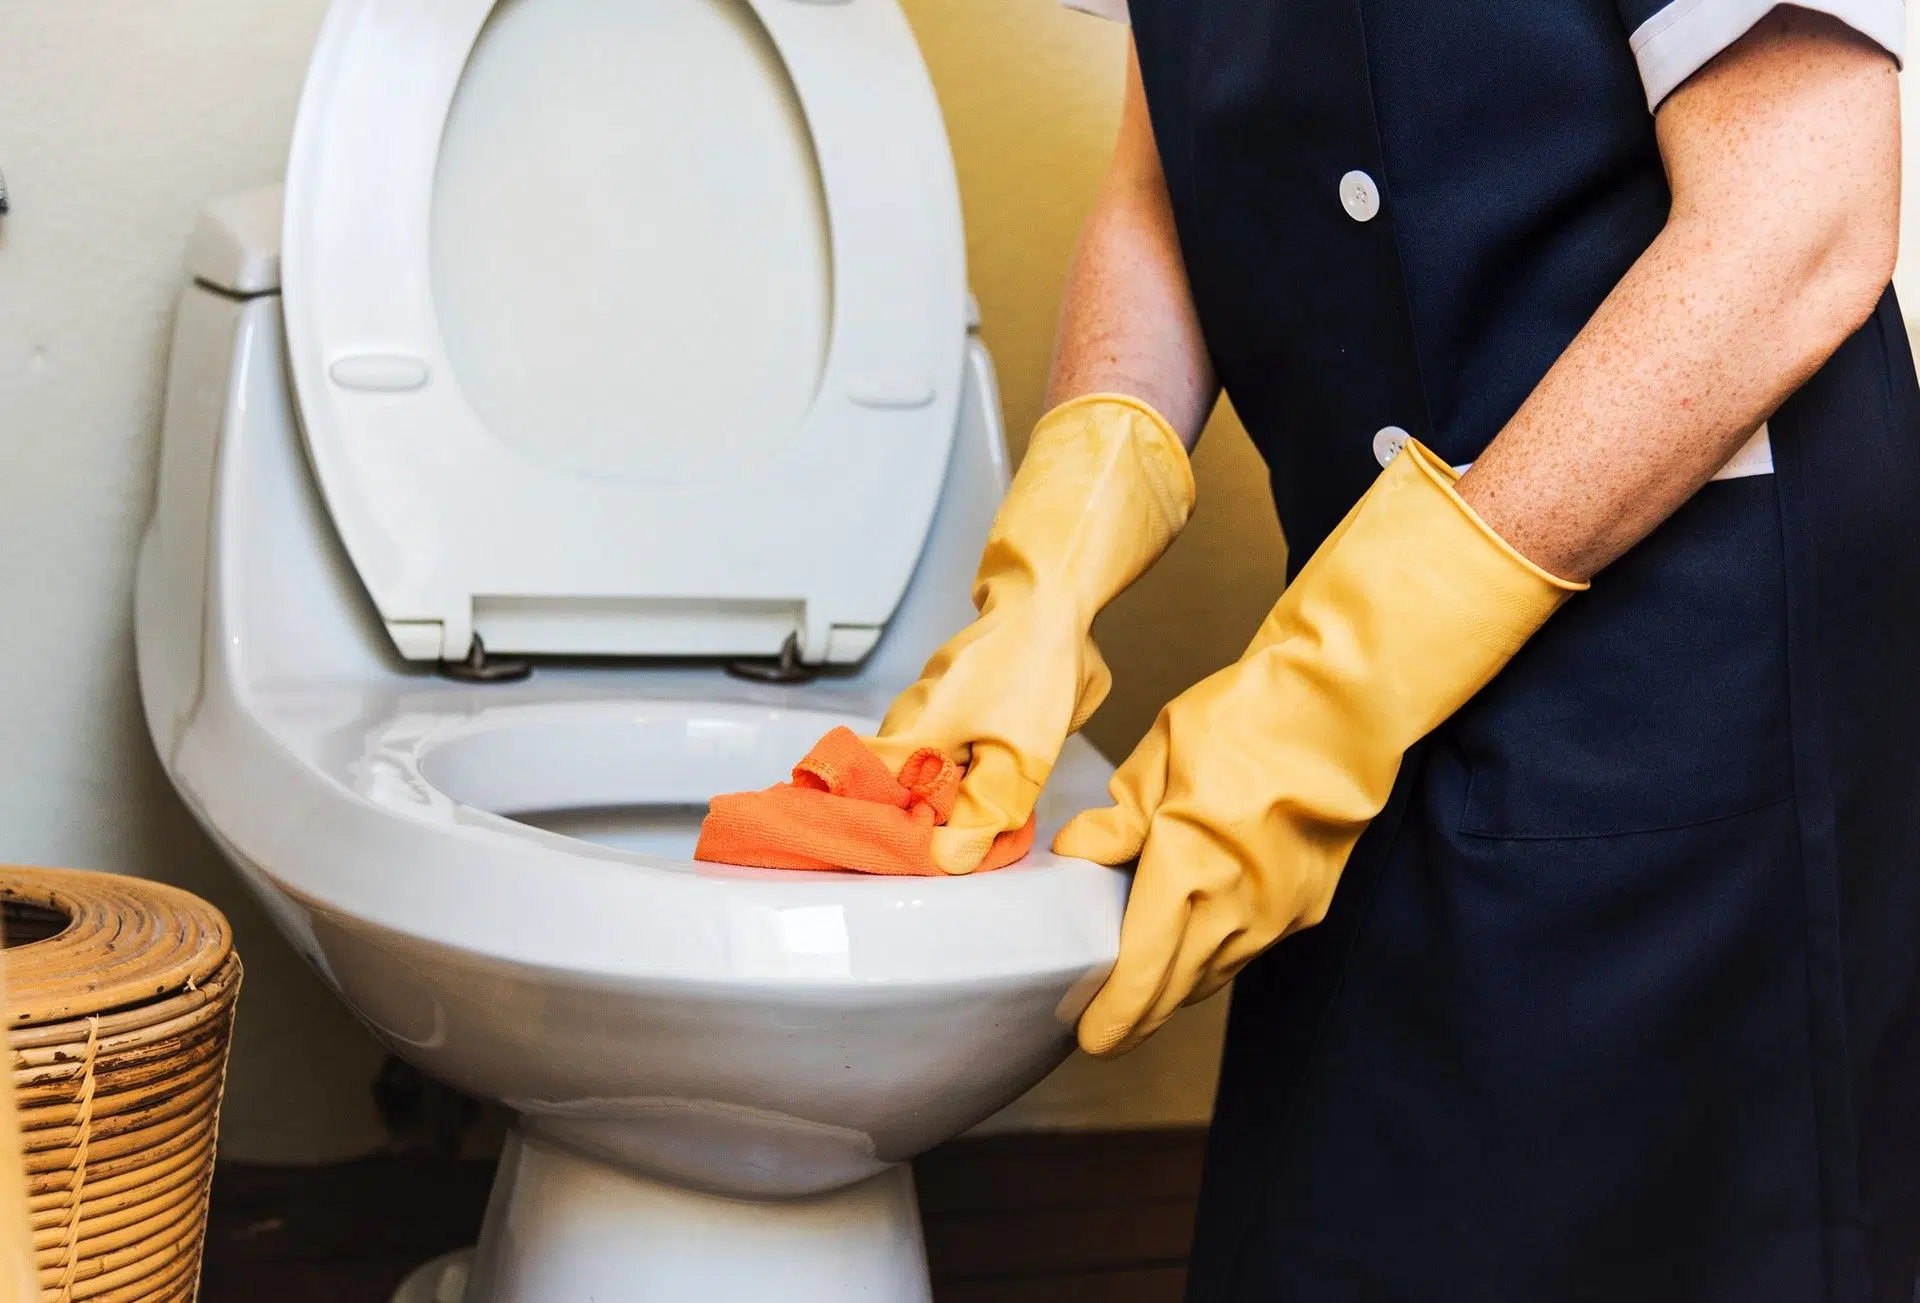 The best office cleaning in NYC includes sanitizing restrooms in busy Midtown Manhattan offices. When it comes to janitorial cleaning services NYC businesses look to Sanmar Building Services for their cleaning services